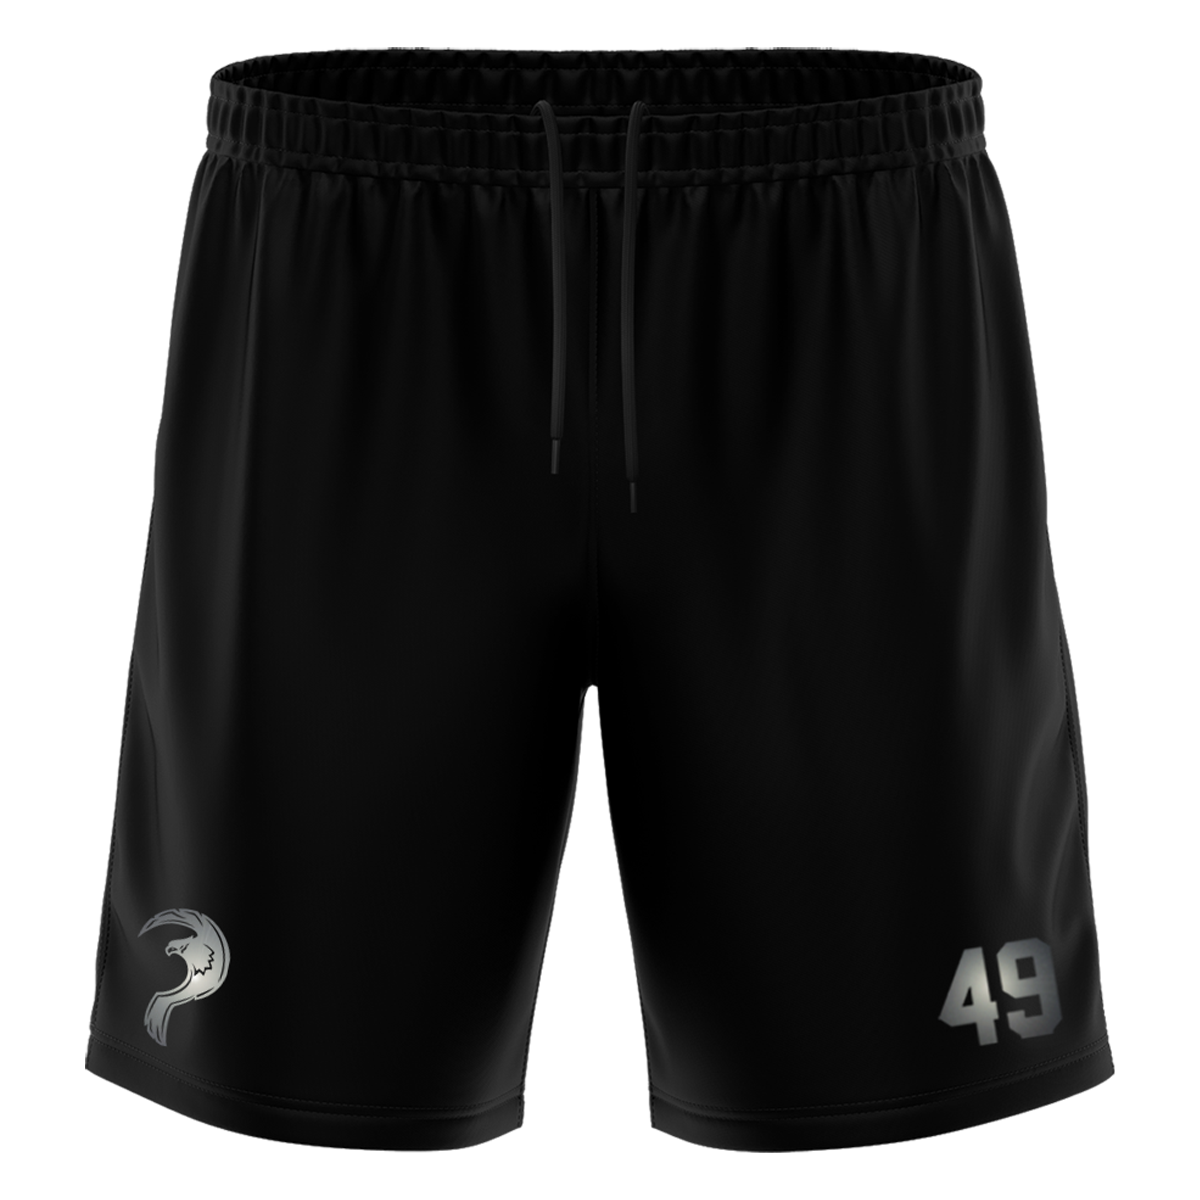 Patriots "Blackline" Training Short with Playernumber or Initials